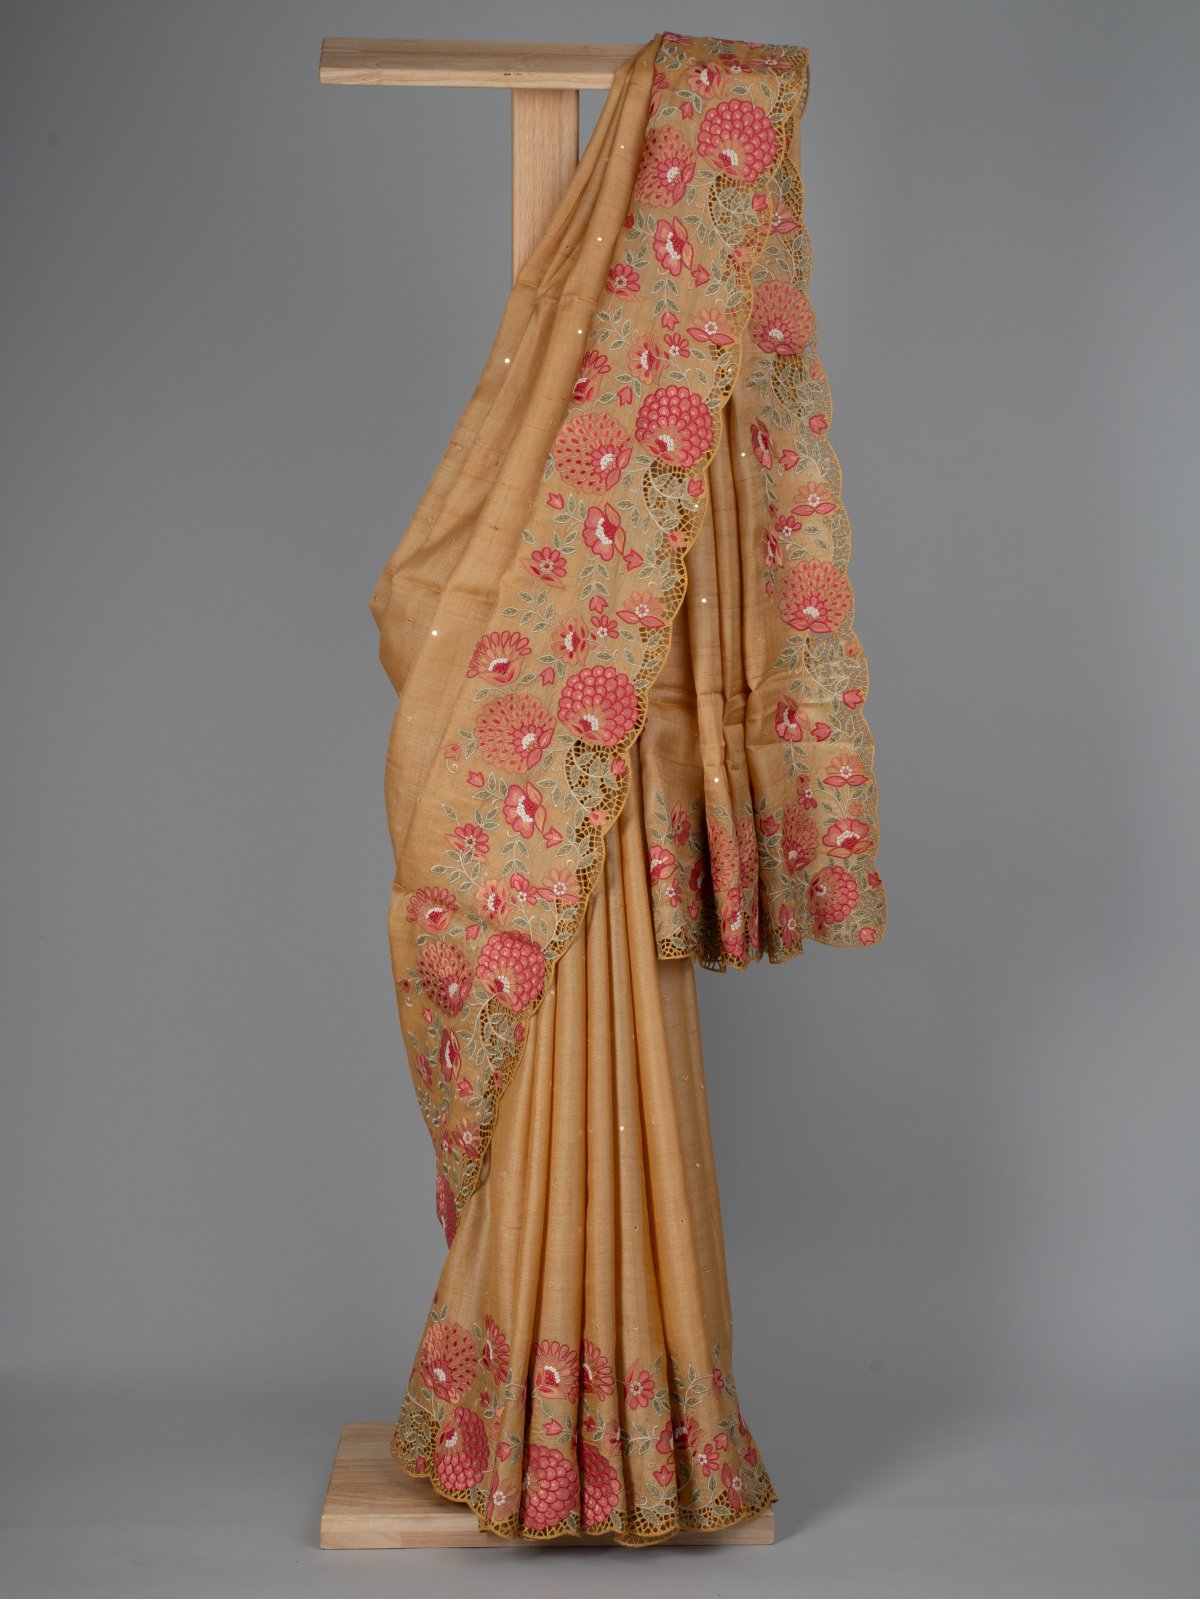 Light Yellow Tussar Silk Saree with Floral Embroidery Border